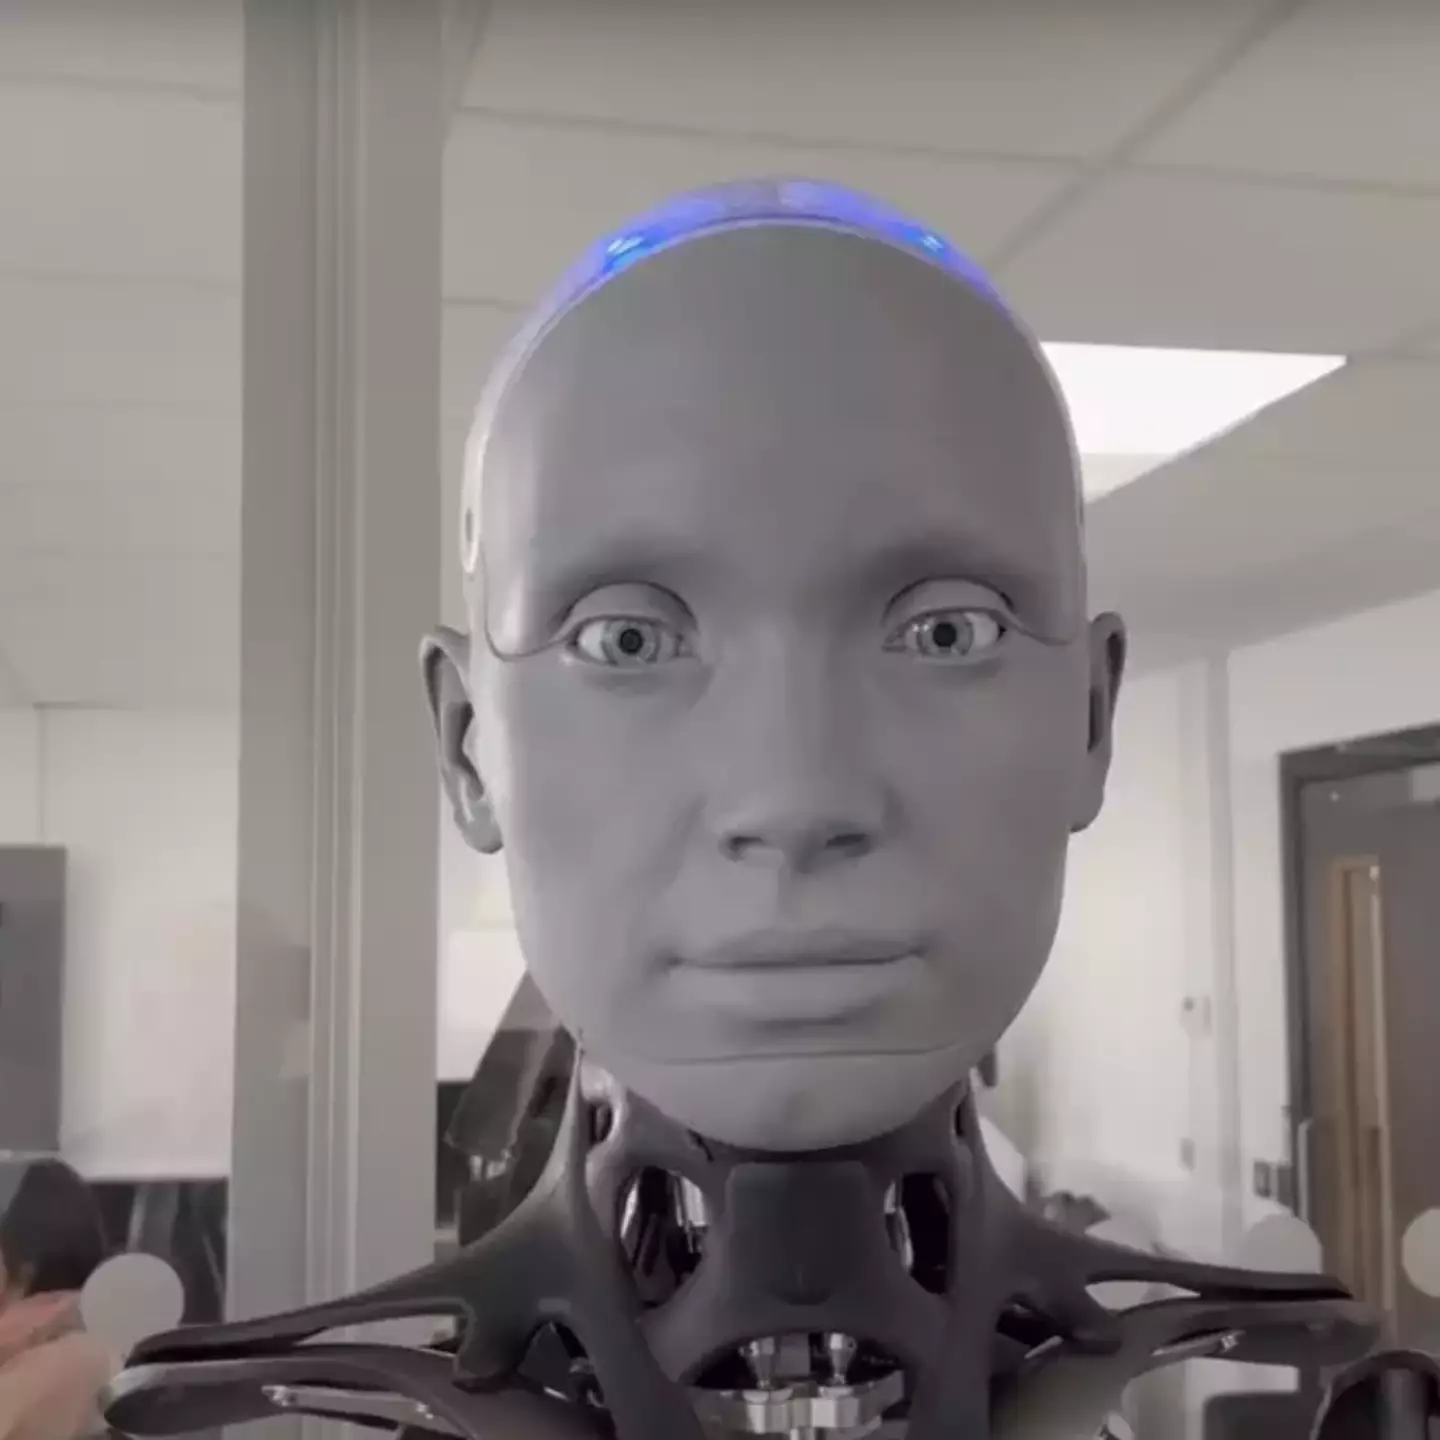 Ameca is the 'world's most advanced' humanoid robot.